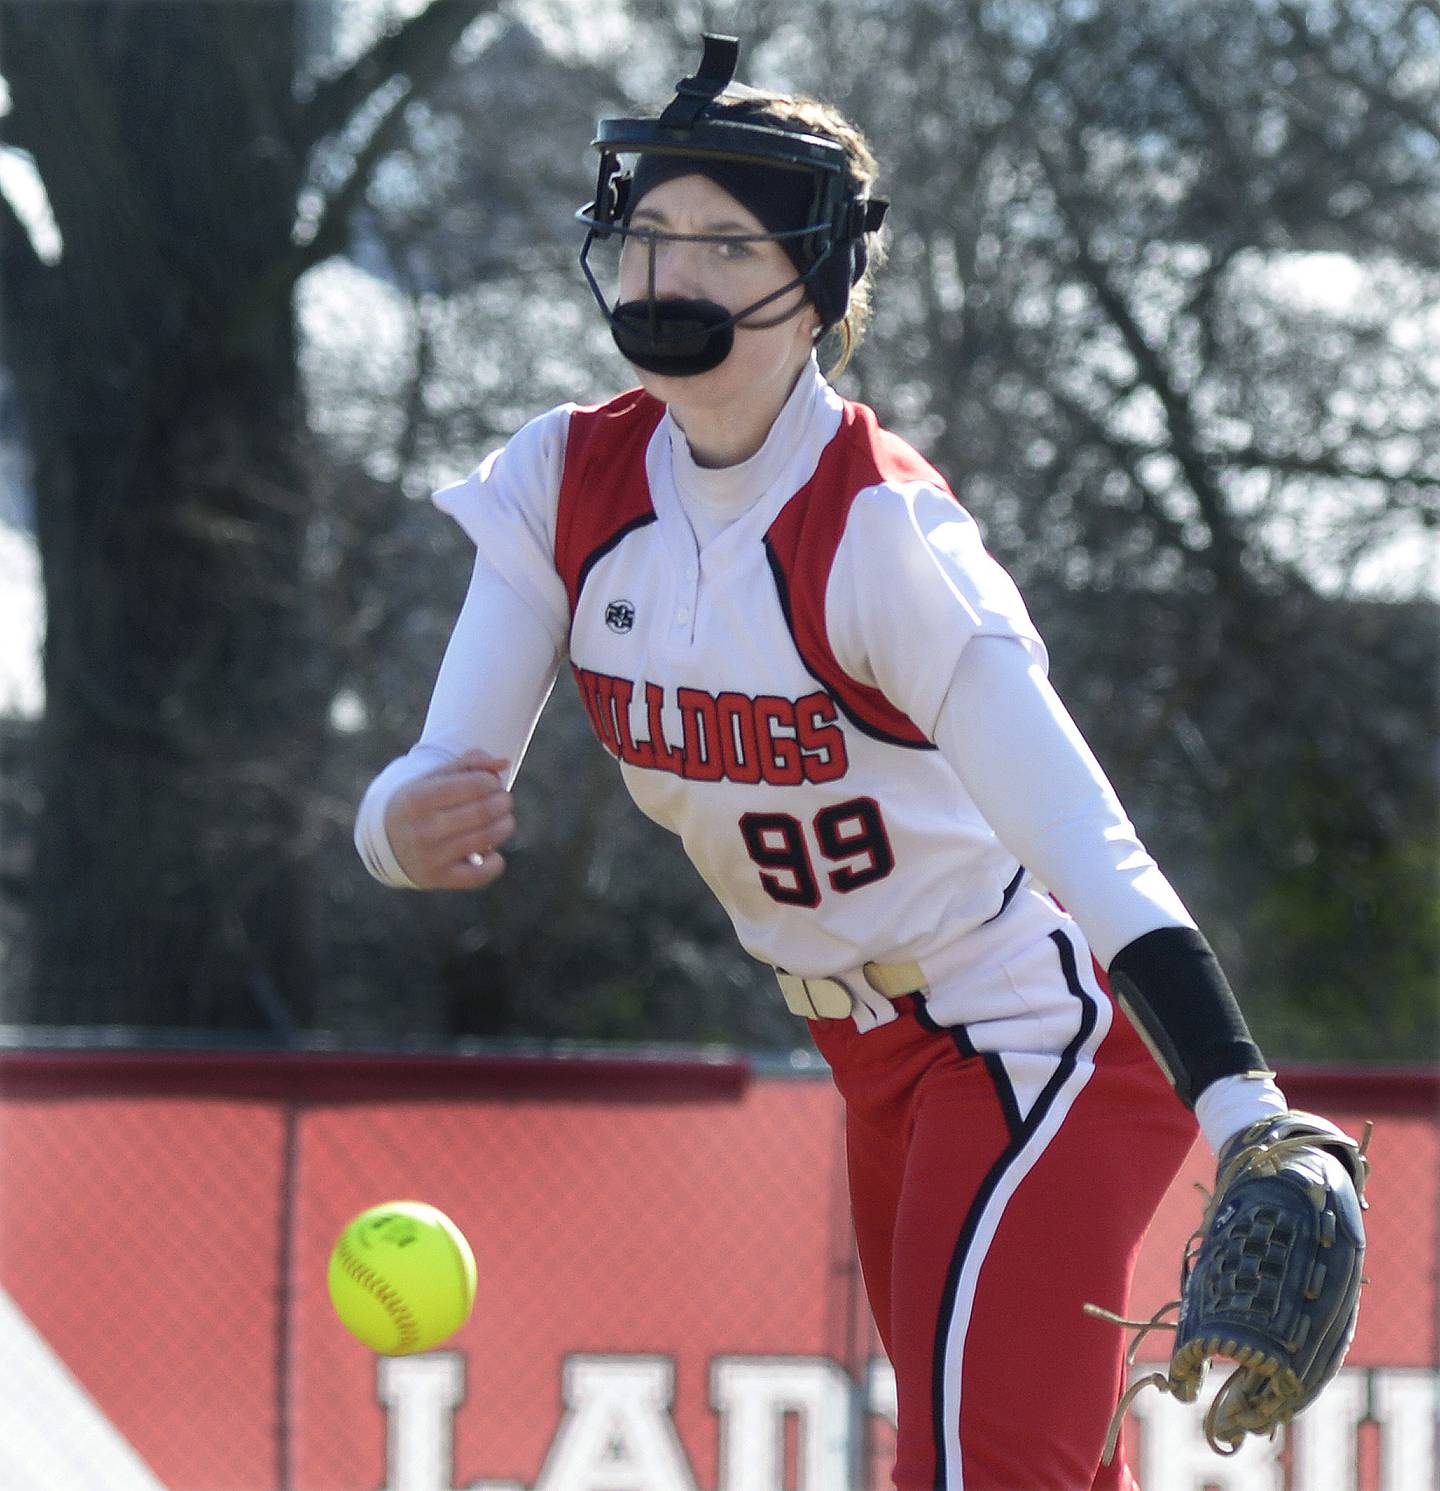 Streator starting pitcher Makenna Ondrey lets go with a pitch against La Salle Peru Wednesday at Streator.